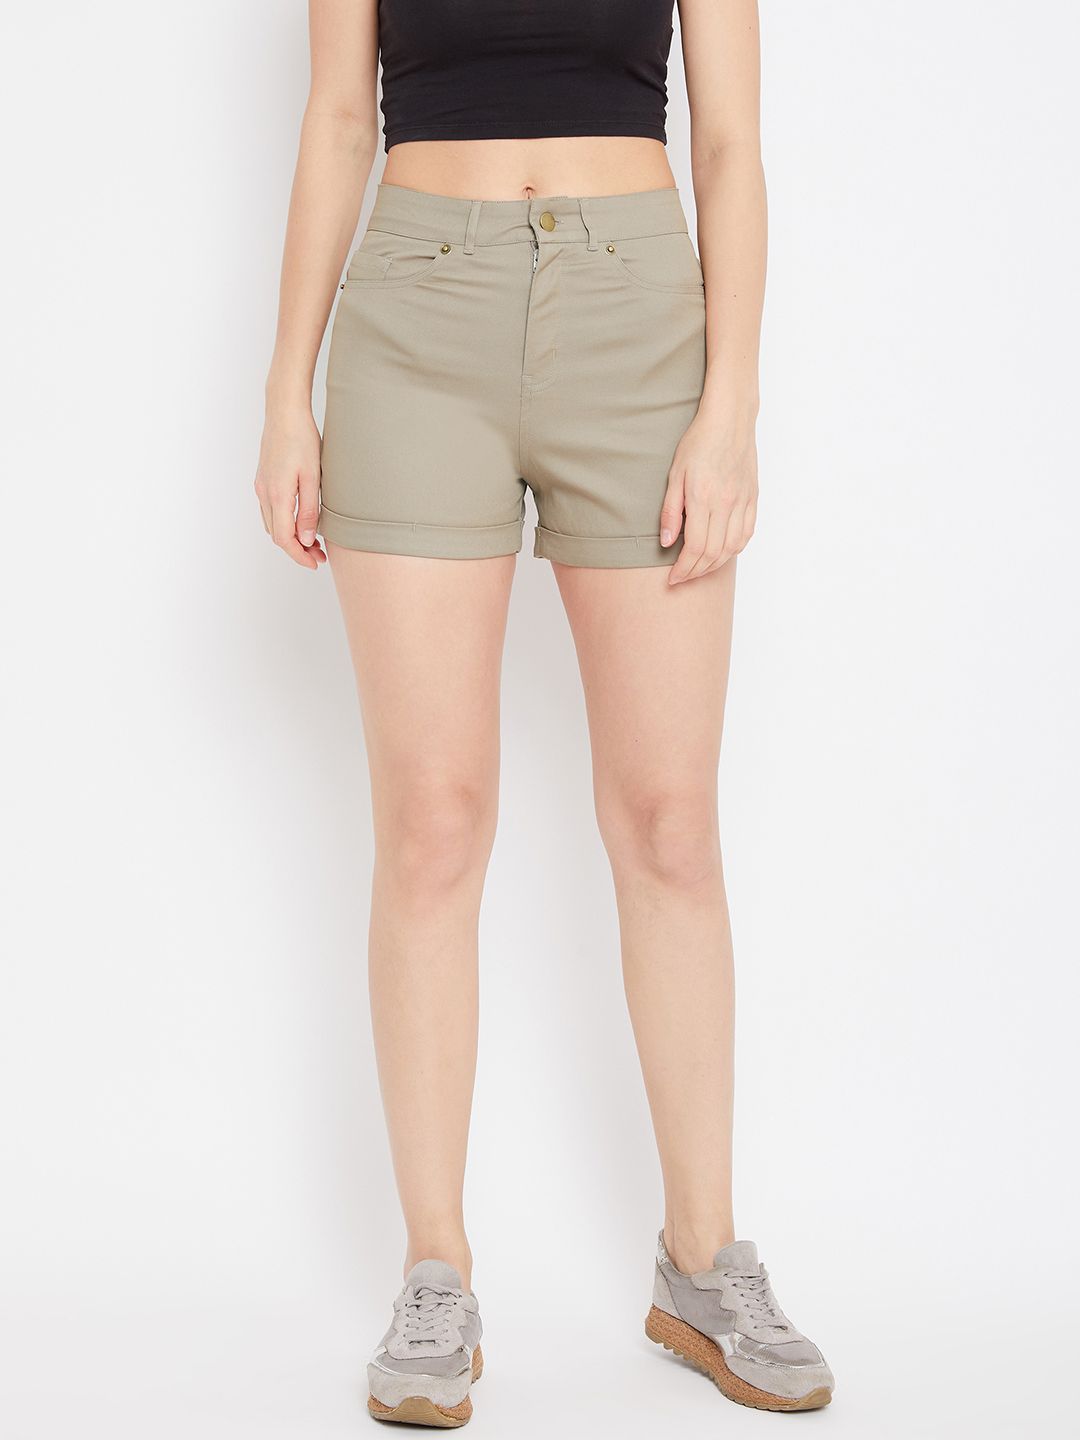 knee length shorts for ladies